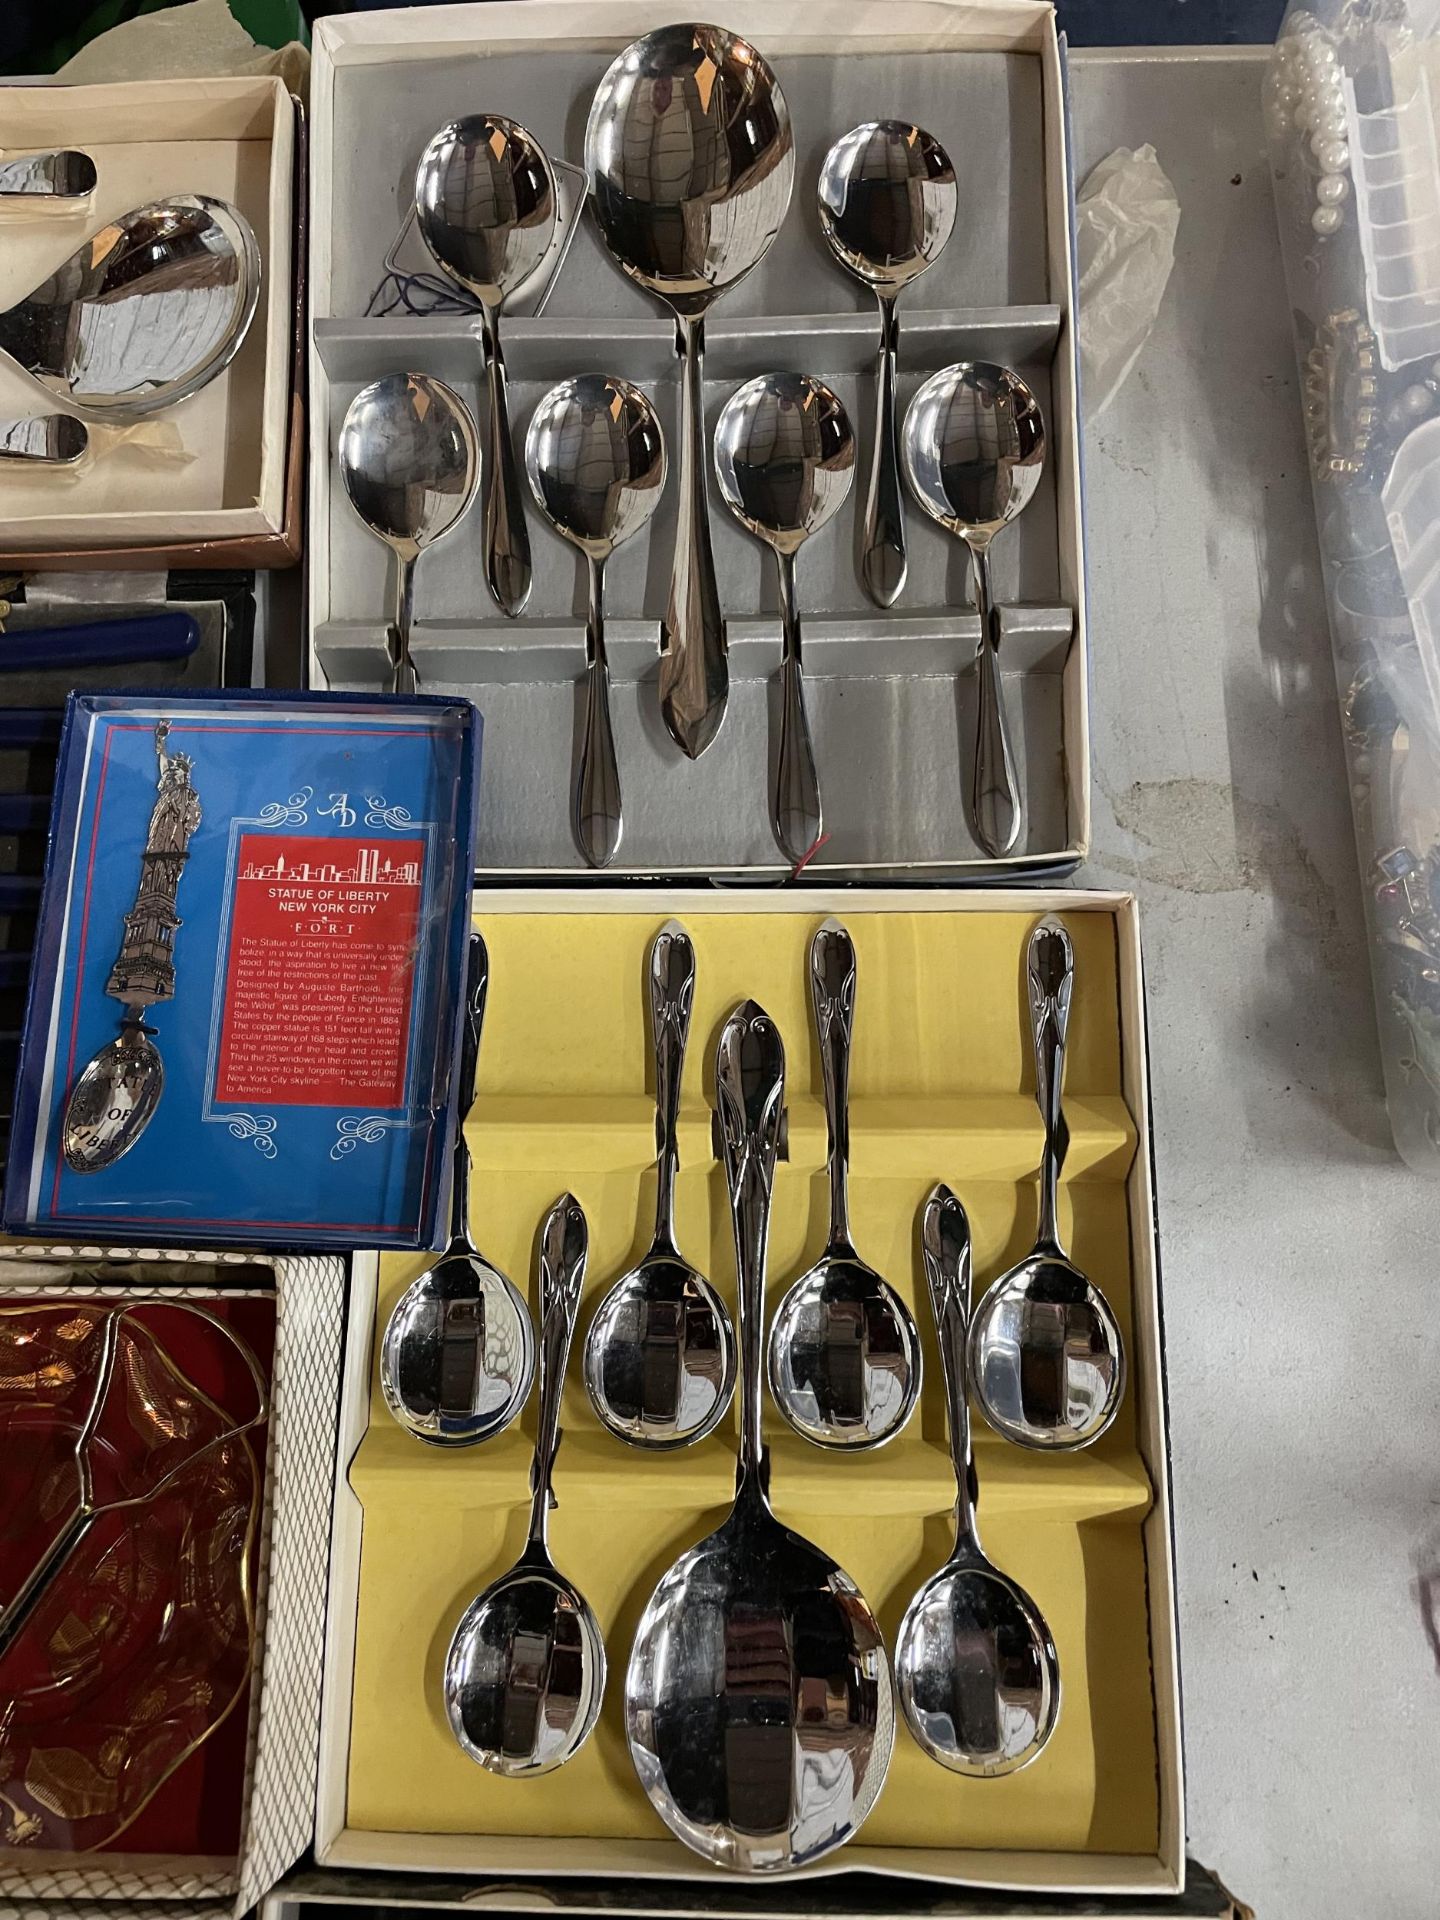 SIX BOXES OF FLATWARE TO INCLUDE KNIVES, FORKS, SPOONS ETC, PLUS A BOXED EGGCUP, NAPKIN RING SET - Image 3 of 4